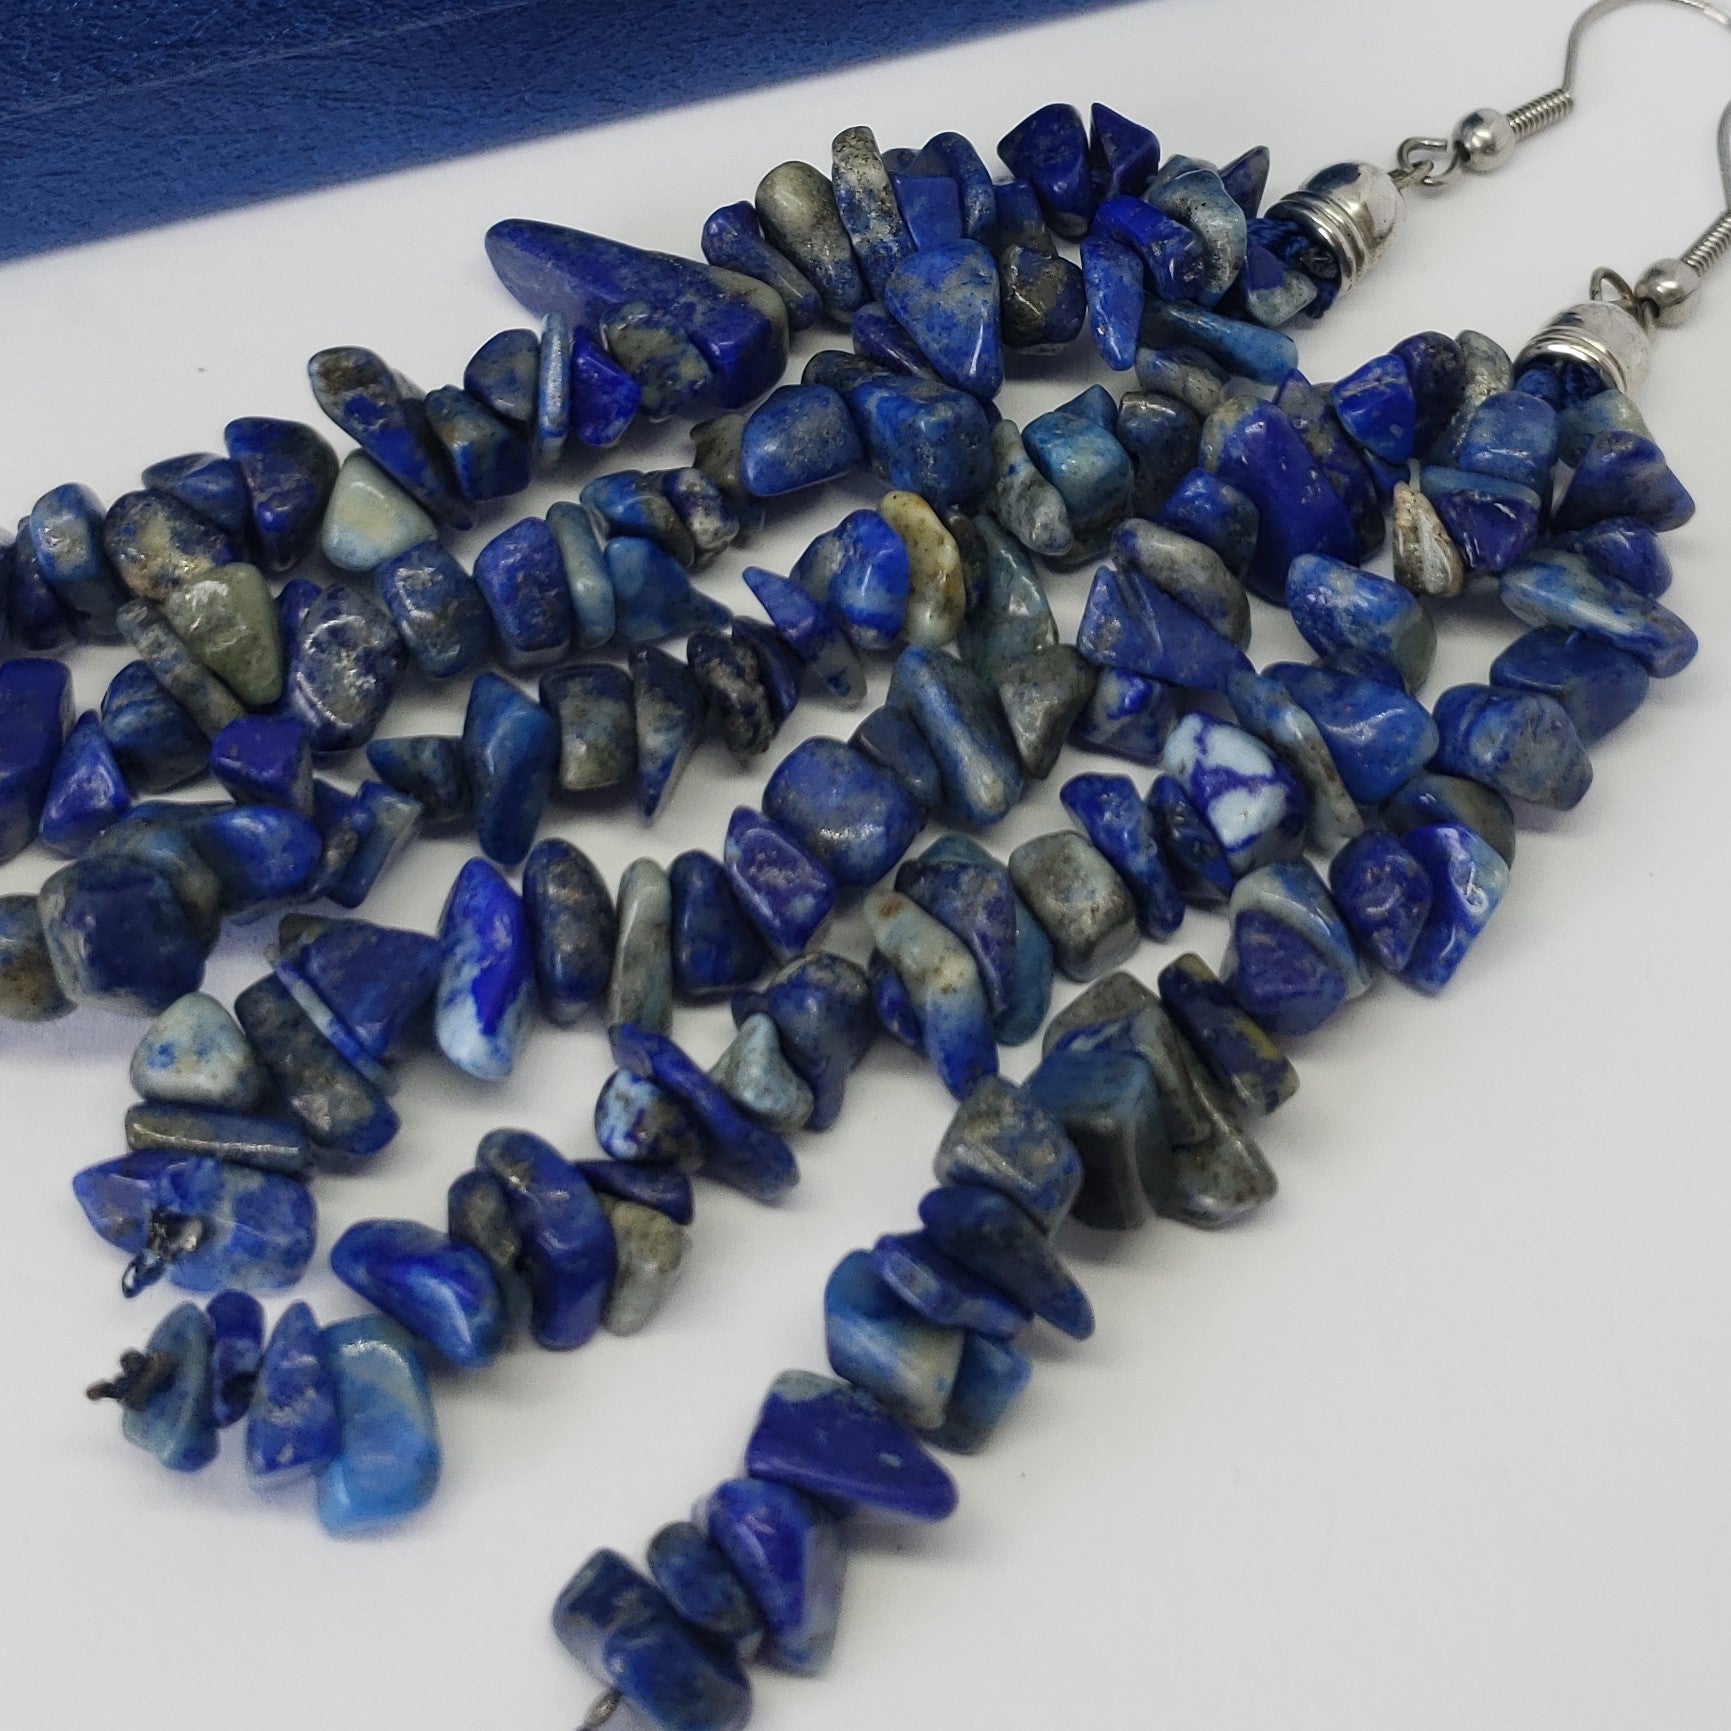 Lapis Lazuli Polished Chip Beads Triple Strand Earrings in Stainless Steel - Houzz of DVA Boutique